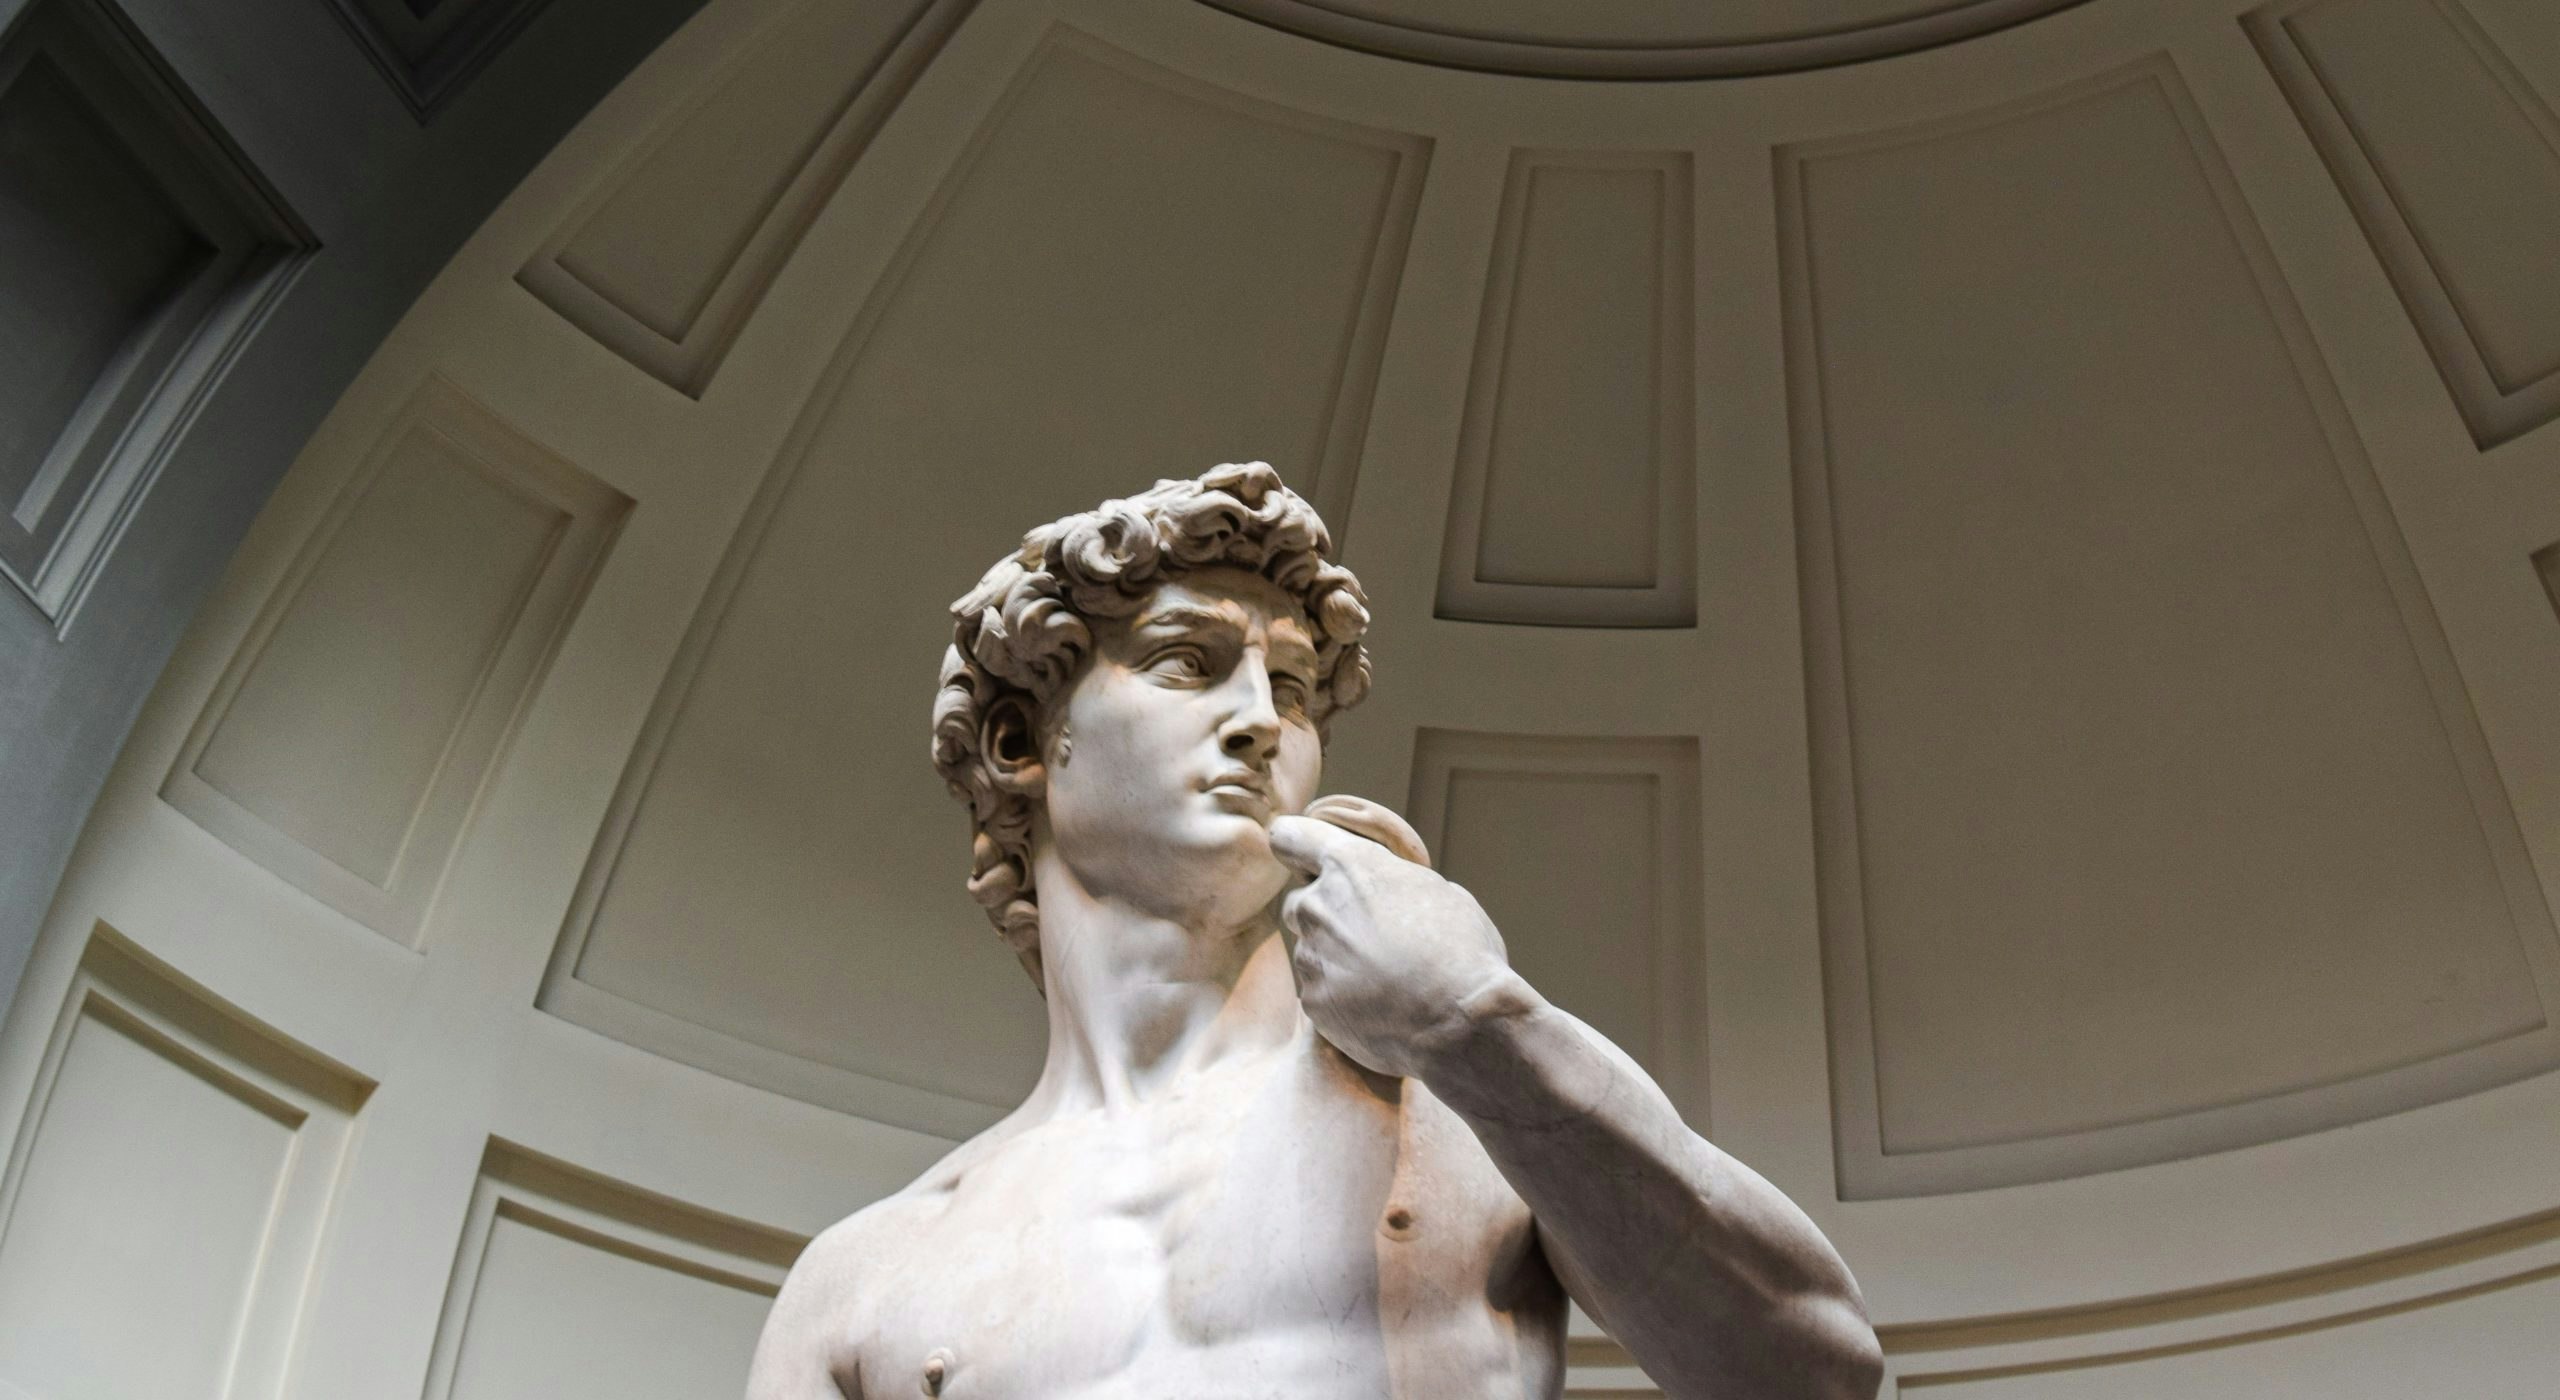 See the artworks of Michelangelo